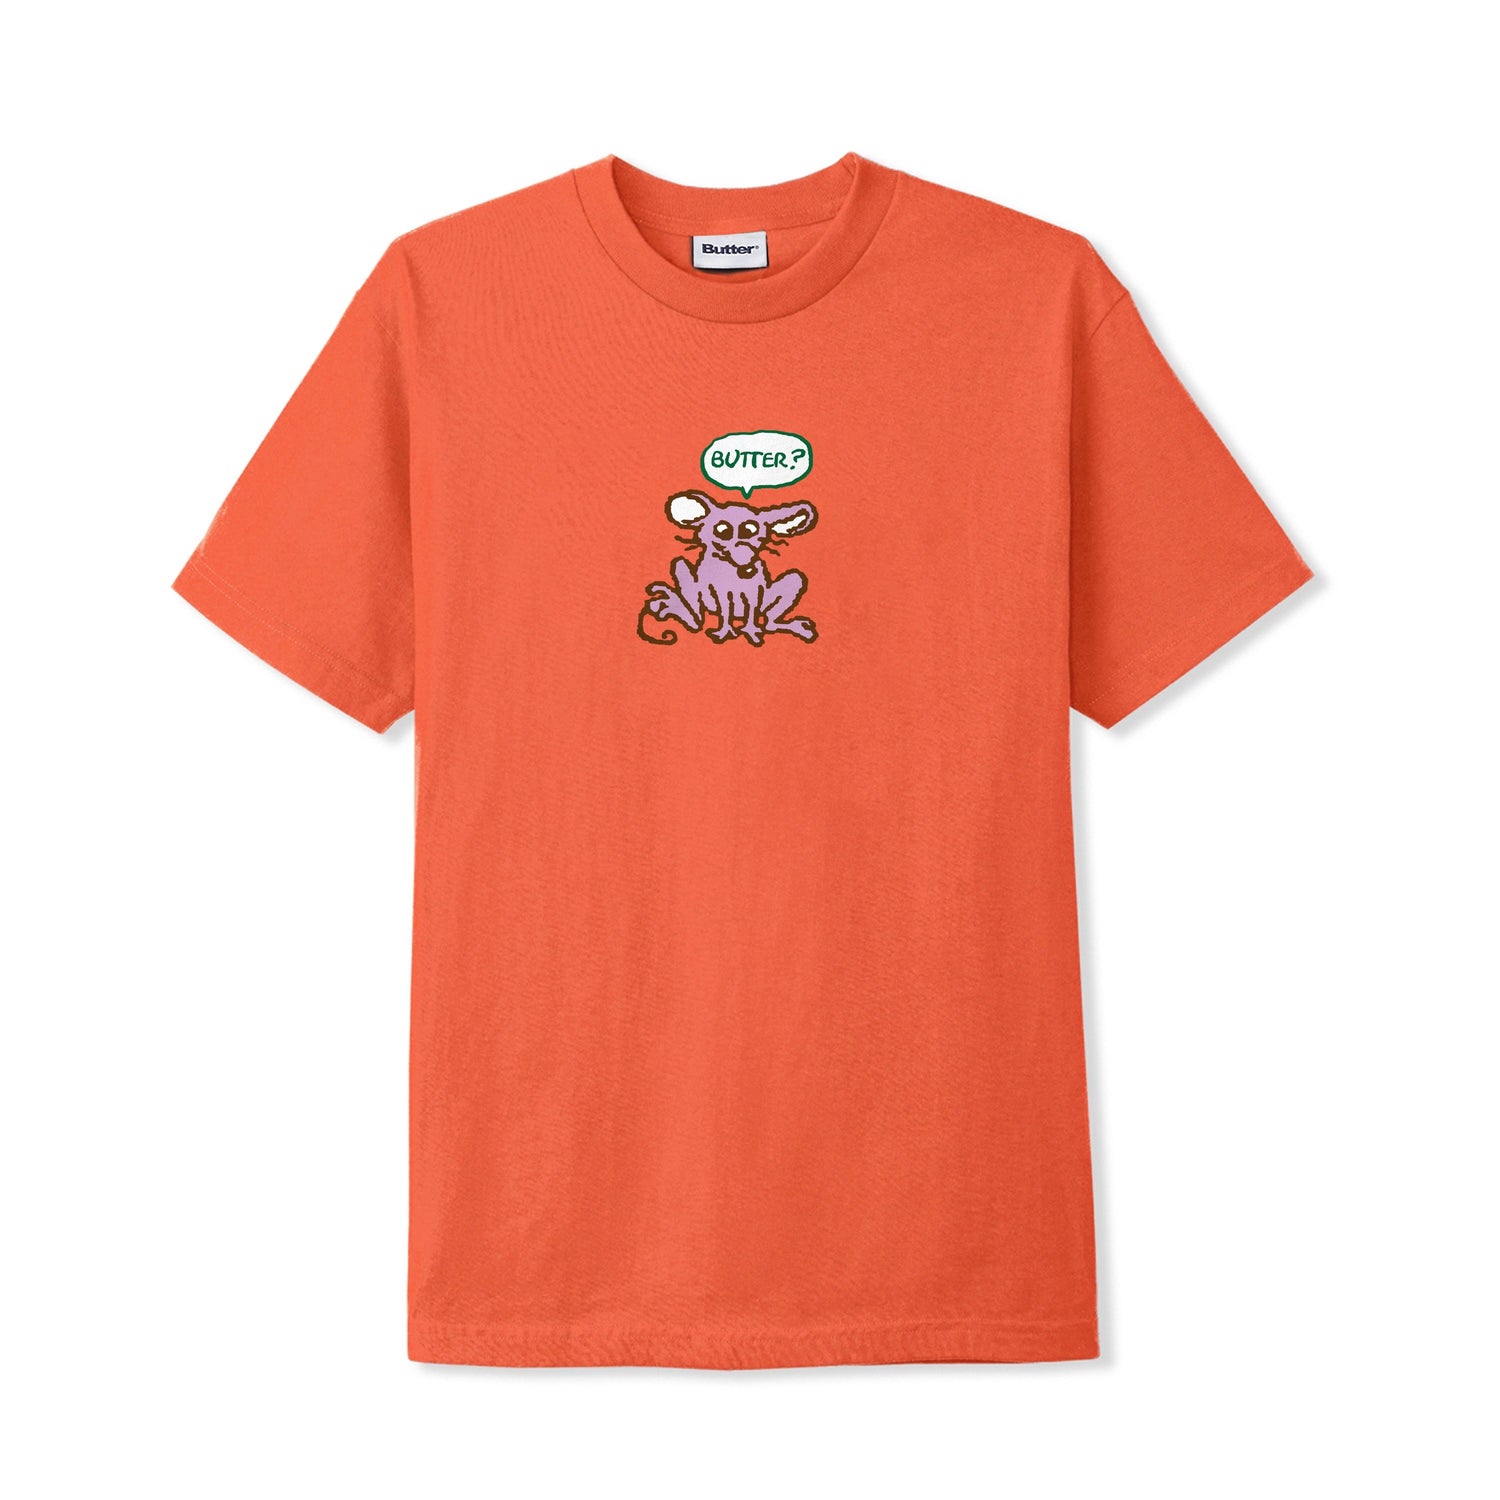 Rodent Tee, Coral